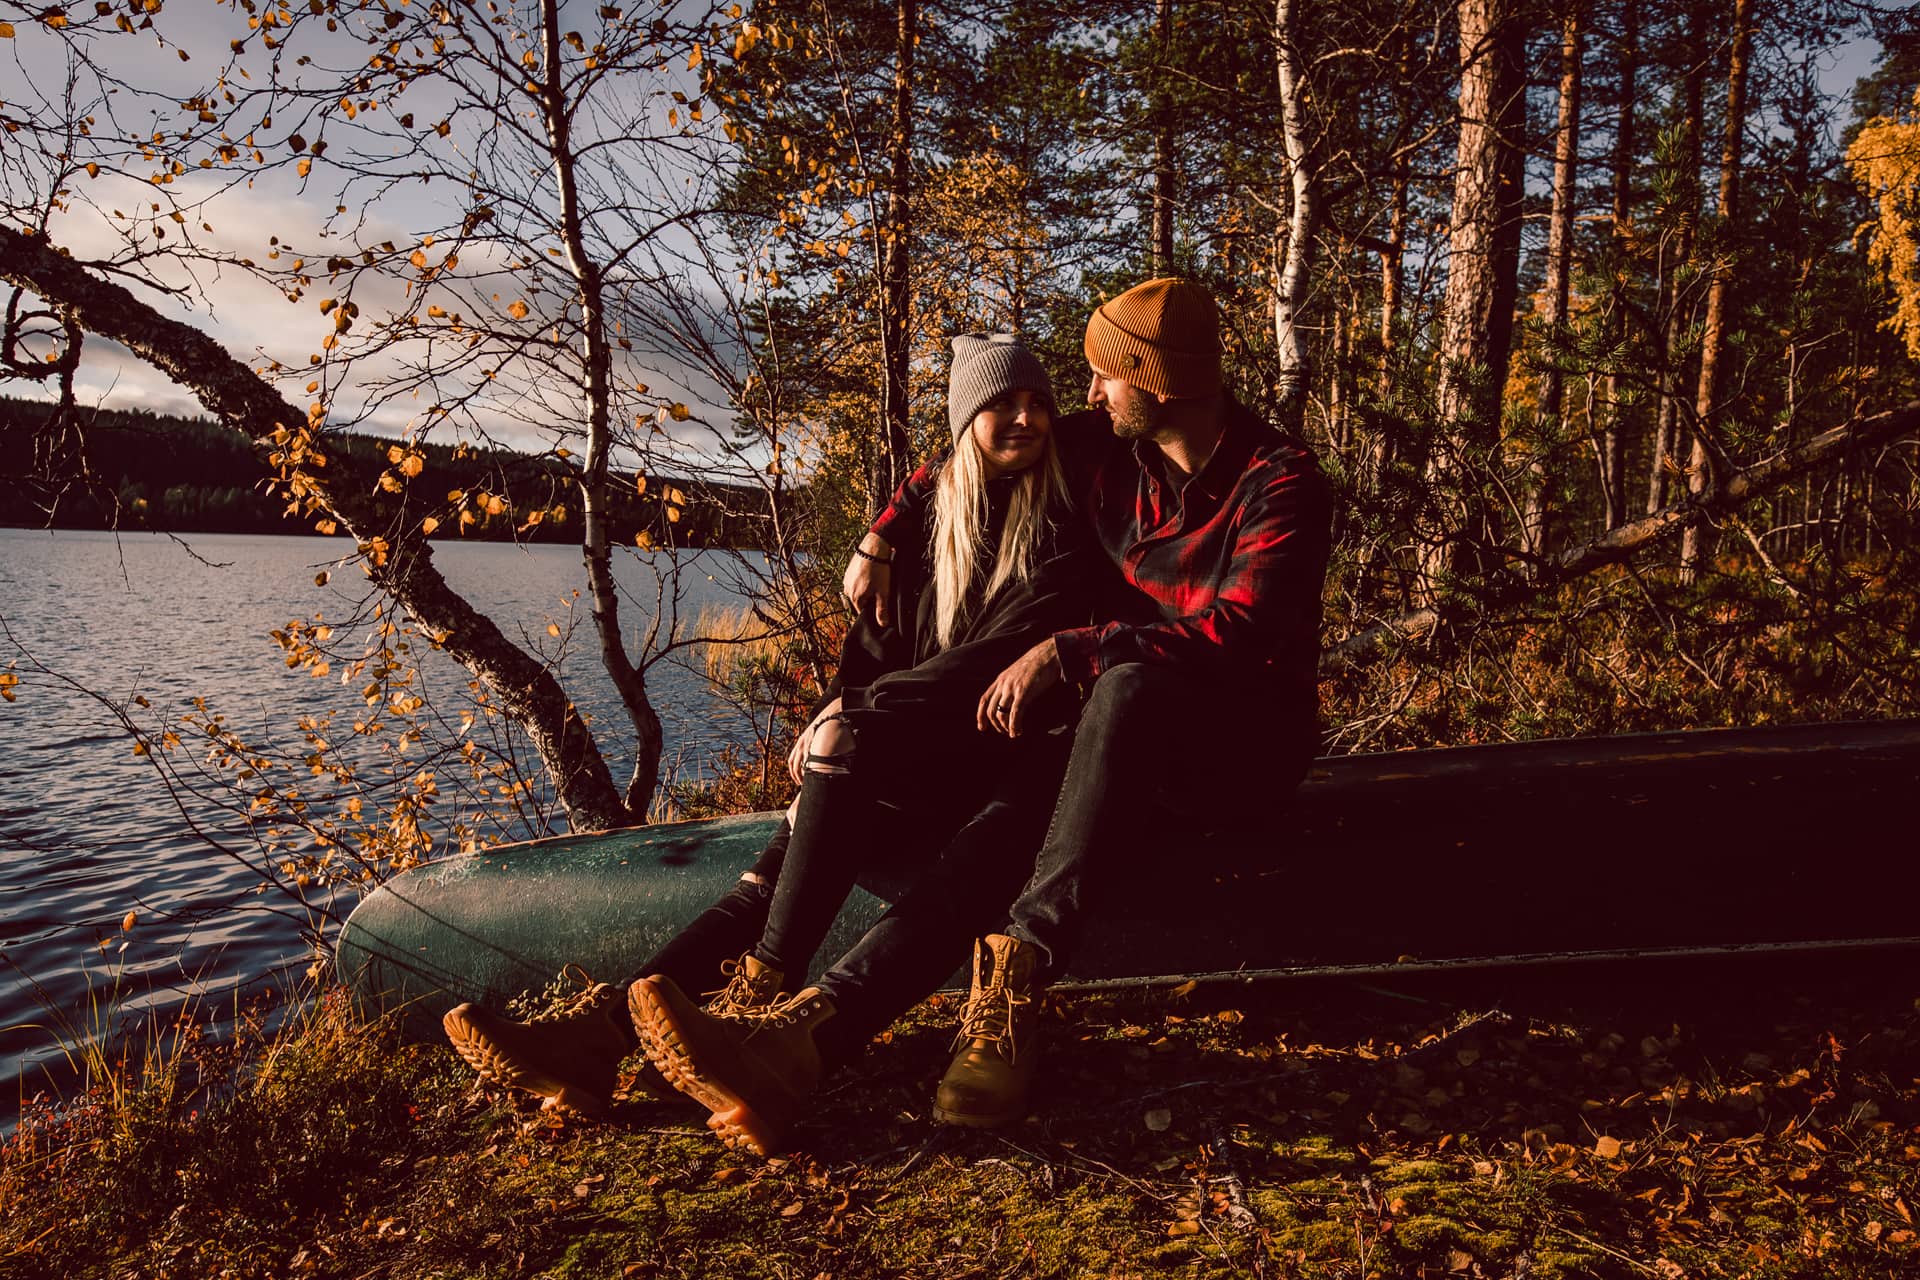 Enjoying moments together. Autumn vacation trip to Aurora Village in Ivalo Lapland Finland.